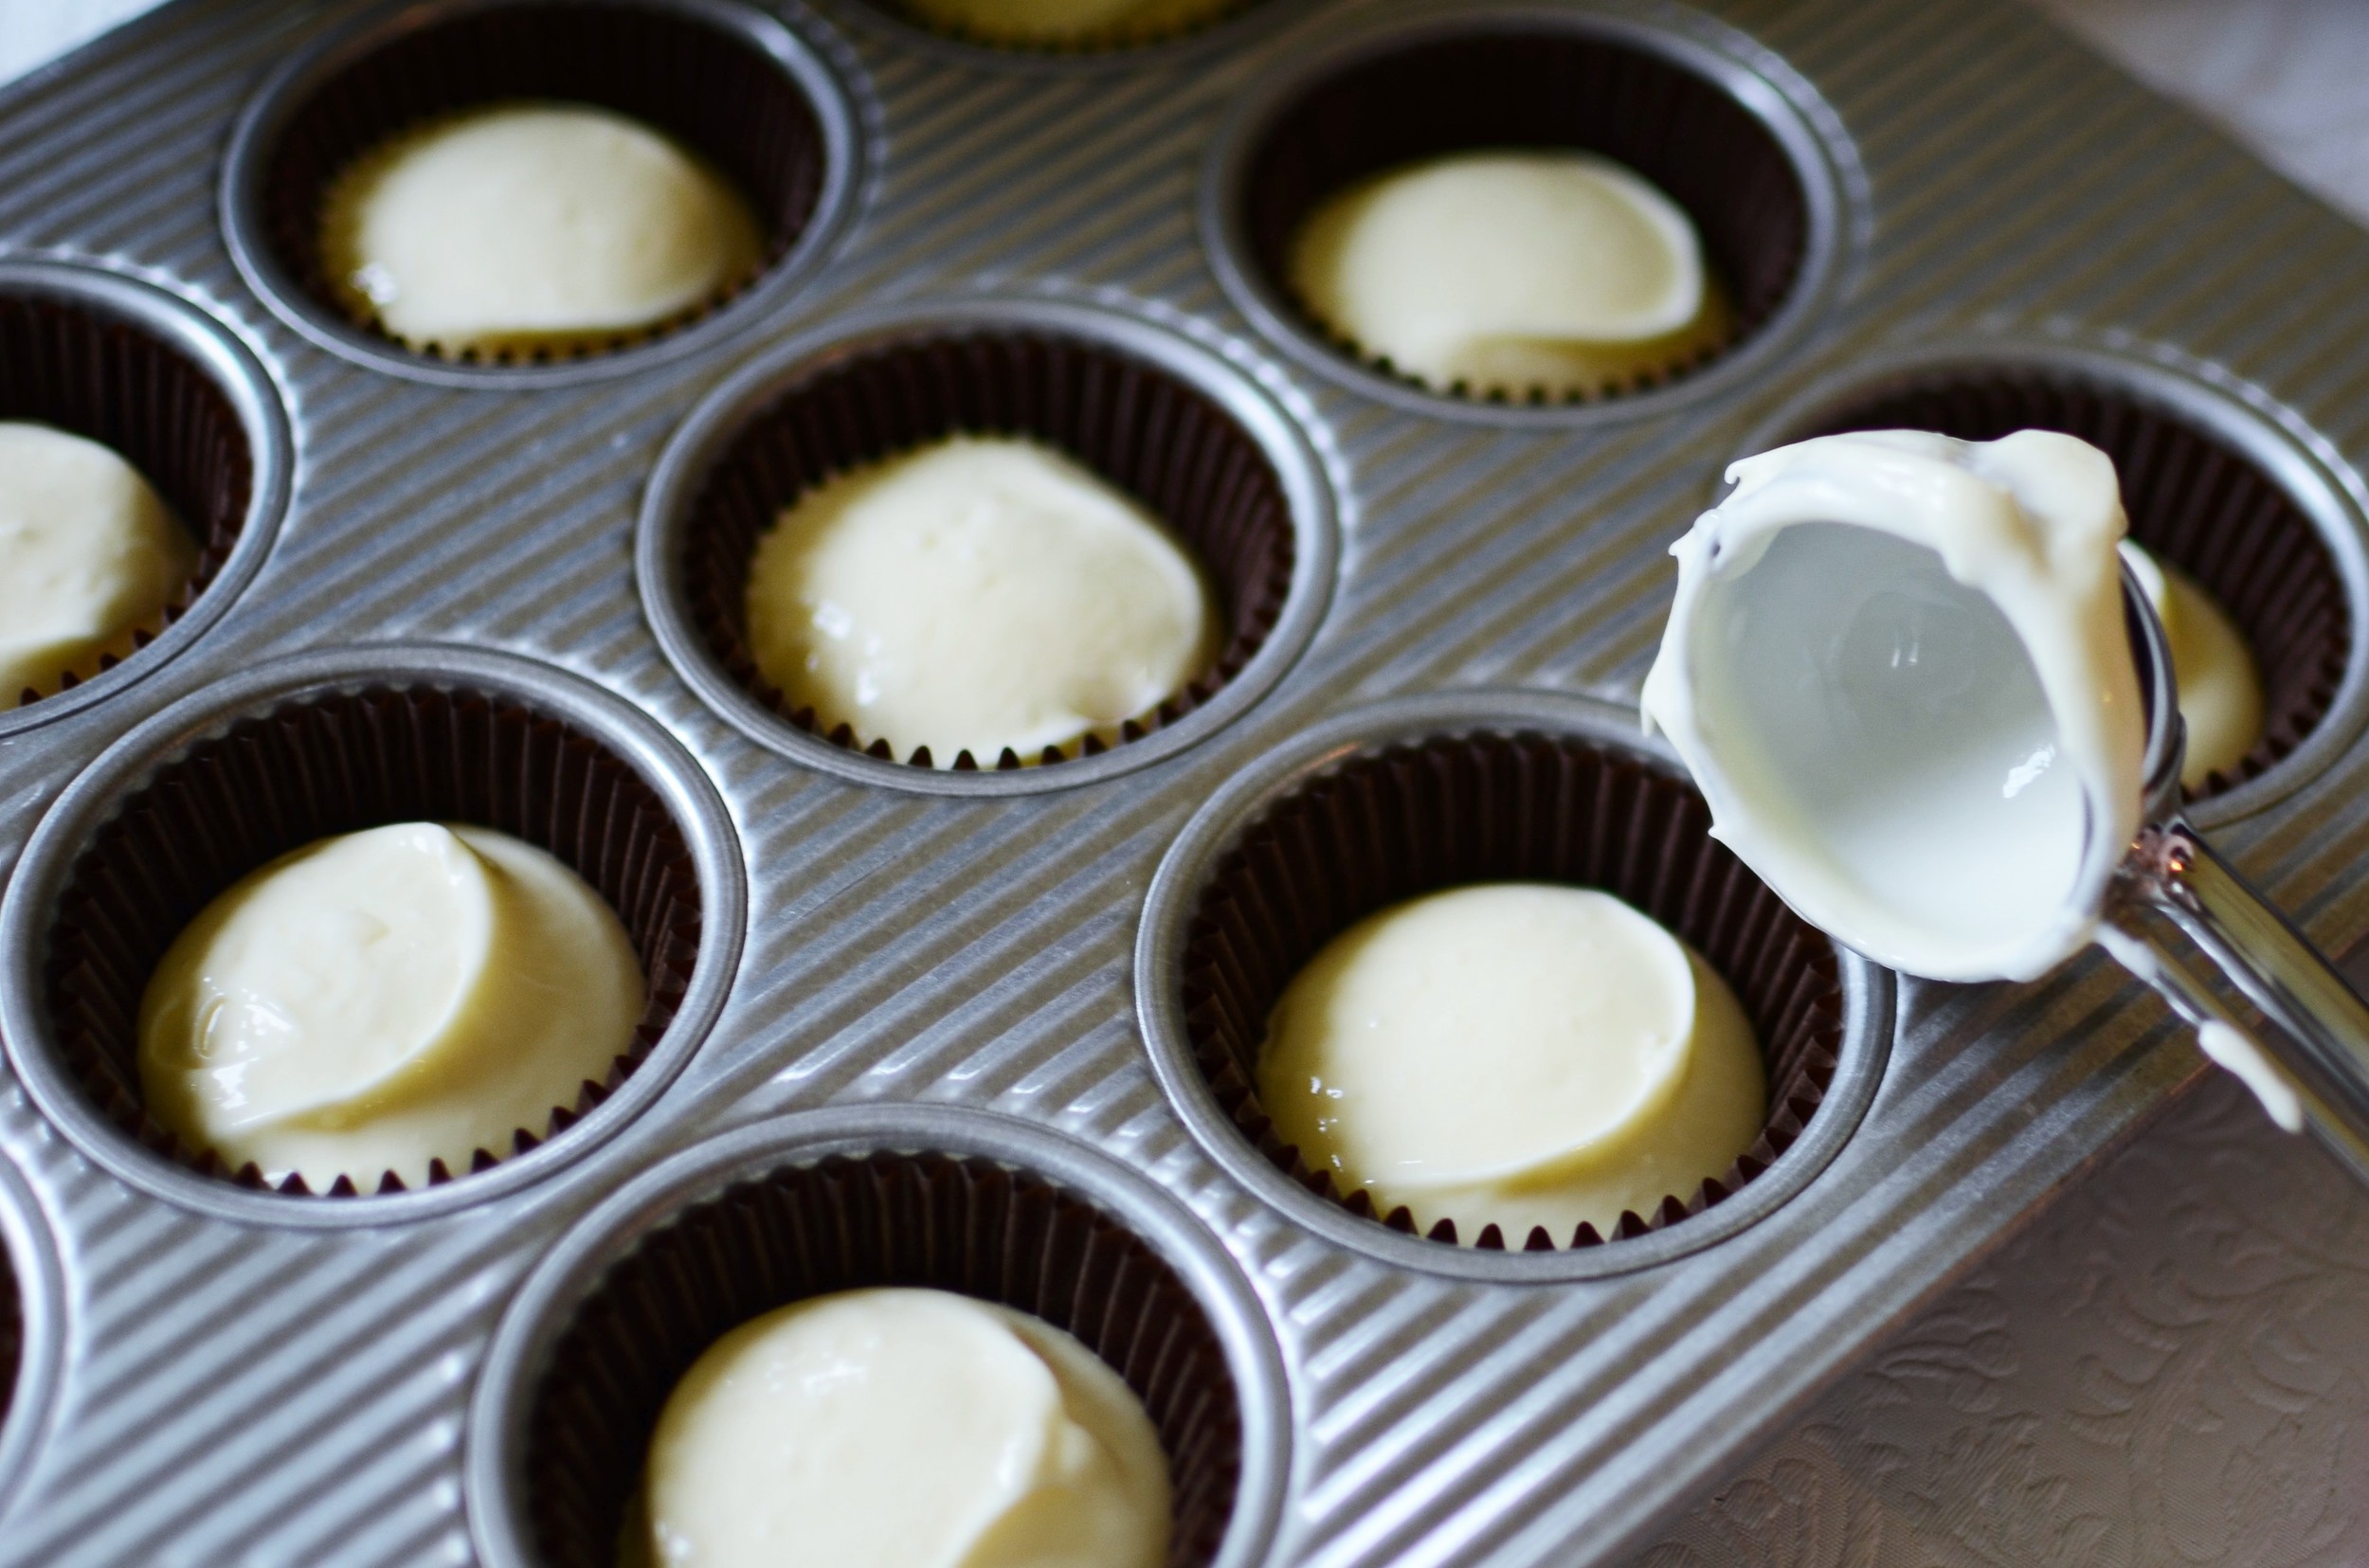 Mini Cheesecake Pan – Where have you been all my life?